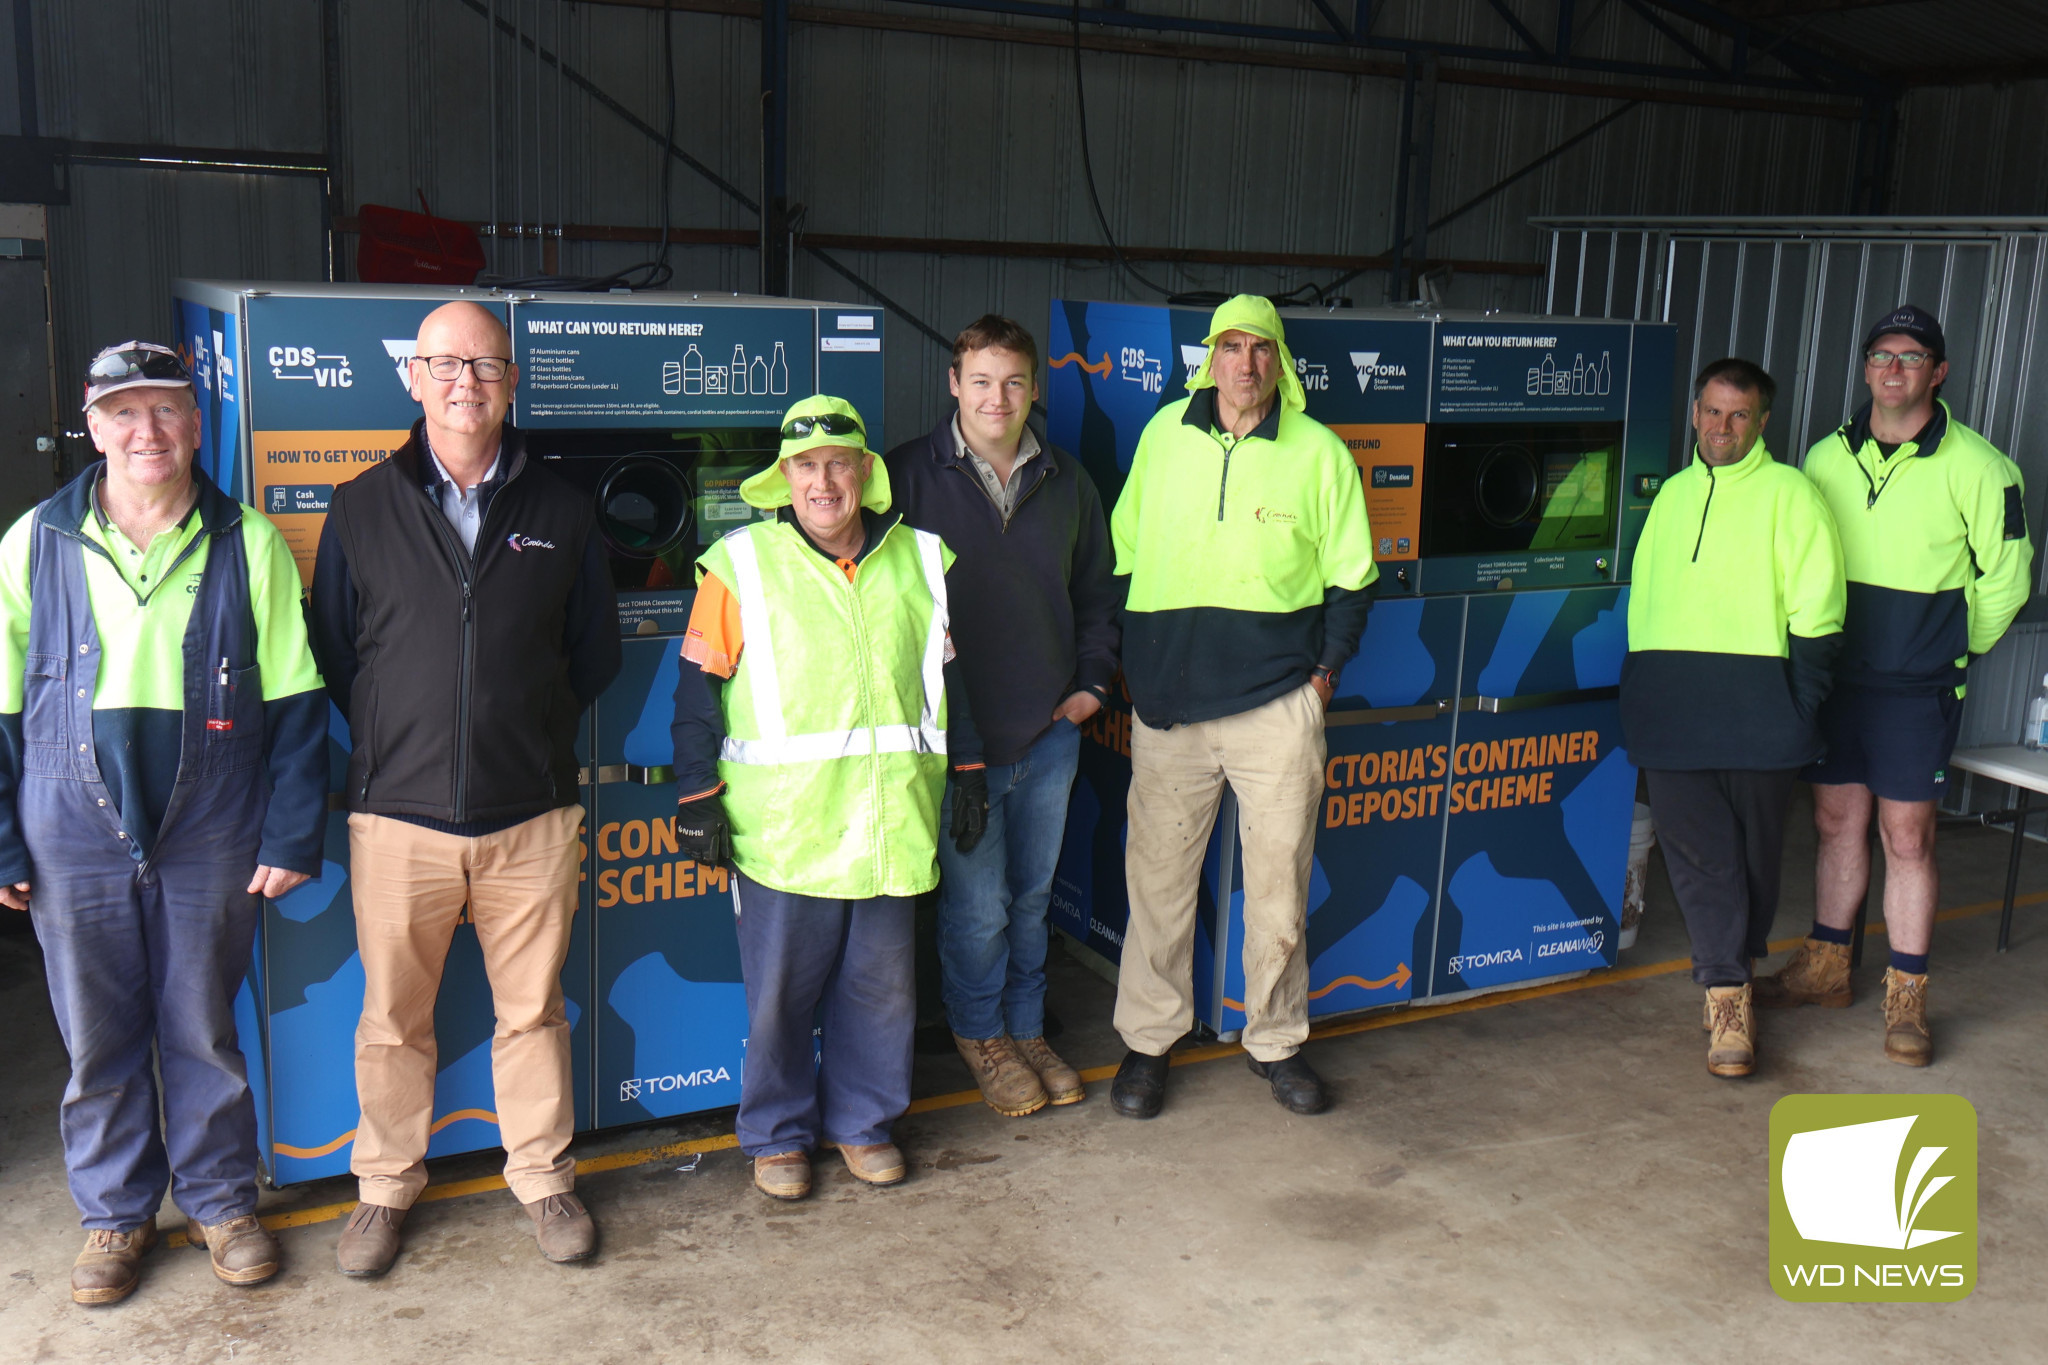 Doubling up: The rollout of Victoria’s container deposit scheme has been so successful in Teramg that a second reverse vending machine was added to the site last week. While the community has shown a strong inclination to recycle their used materials, the success of the scheme is also a credit to the hard work of Cooinda participants.